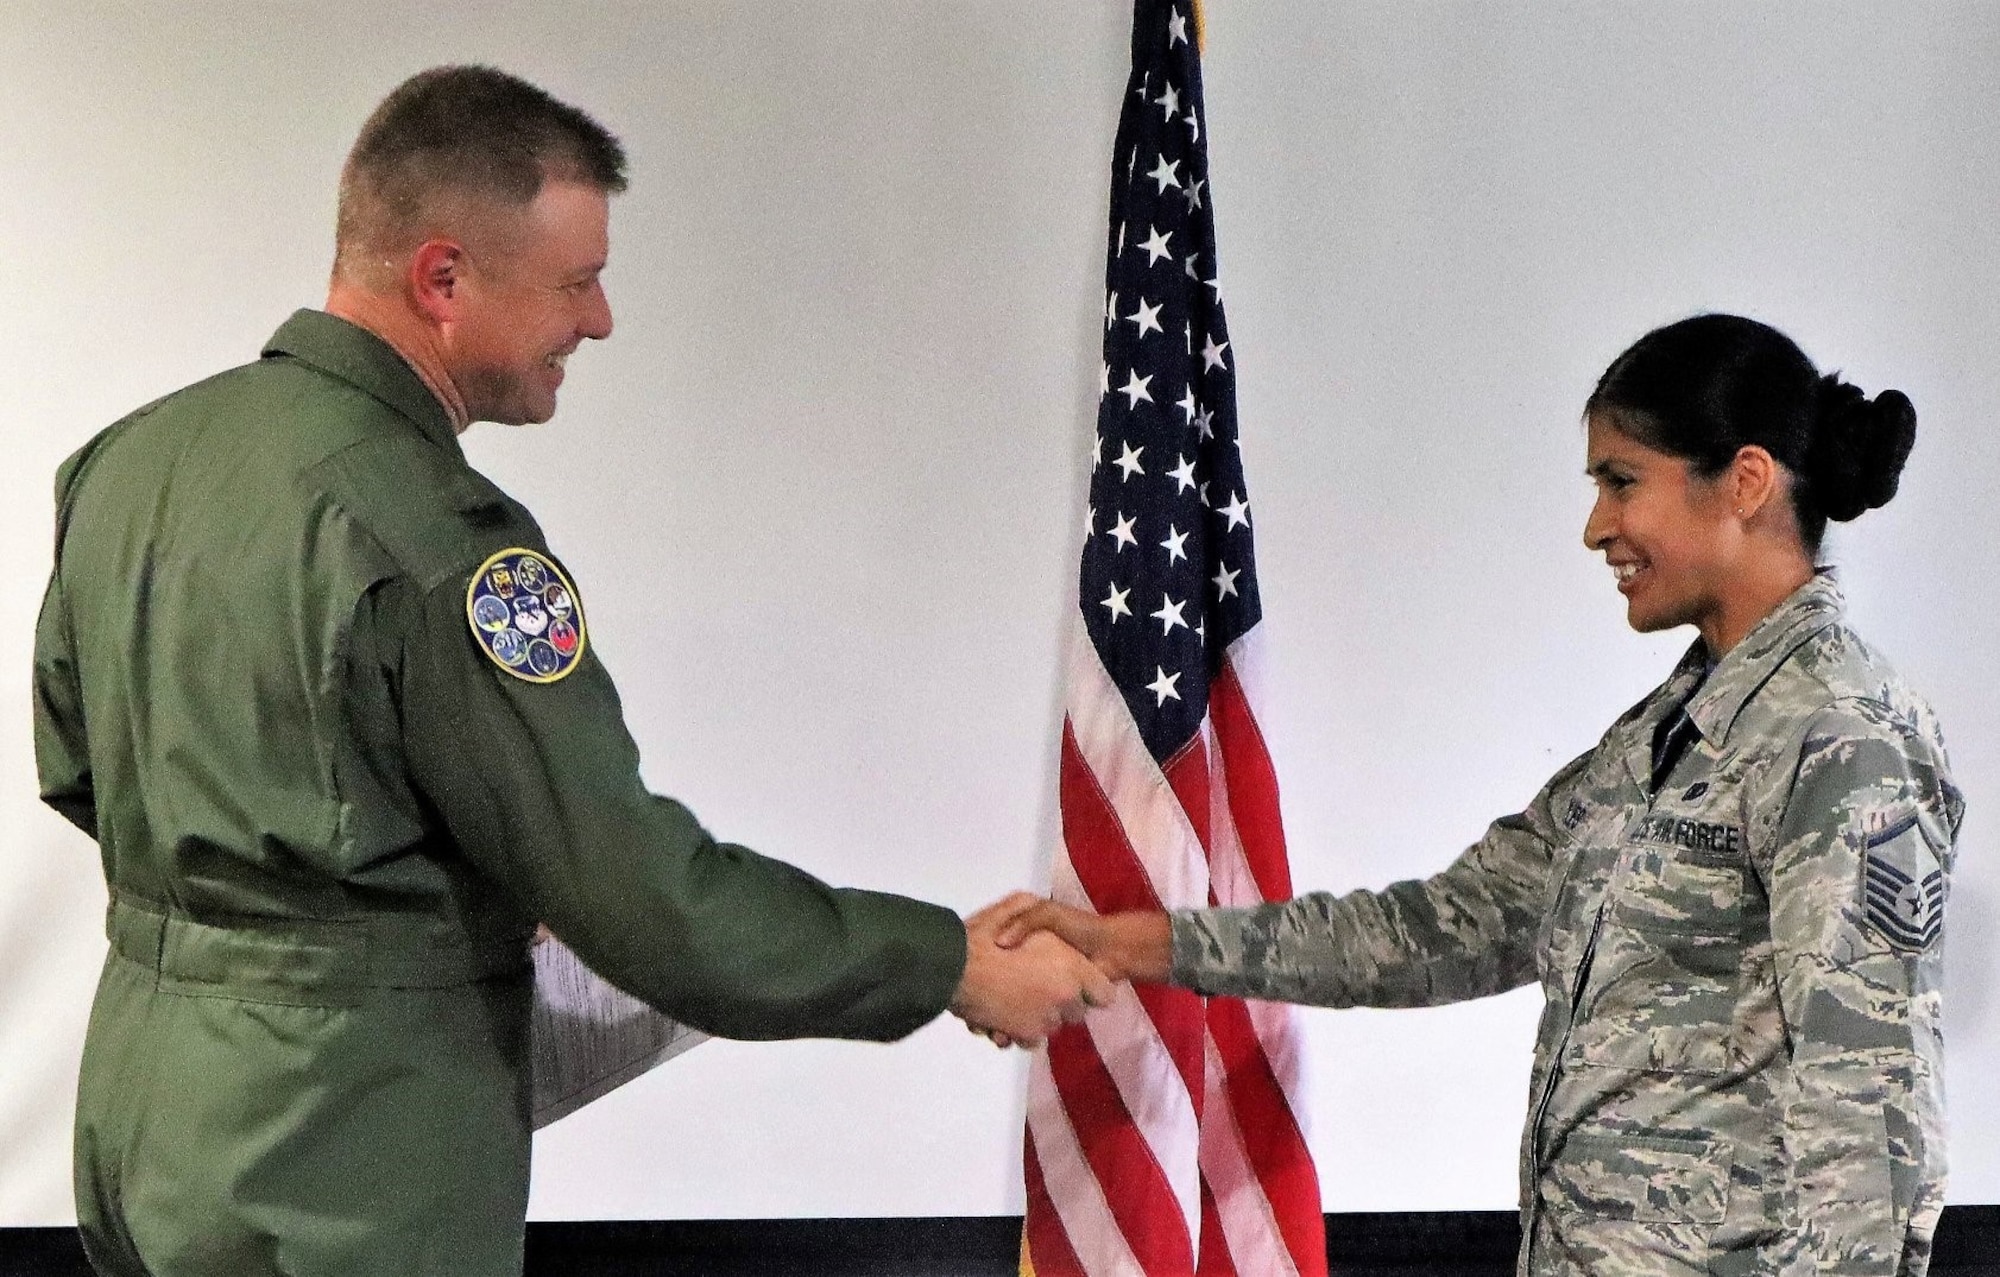 Col. Allen Duckworth, commander of the 340th Flying Training Group, JBSA-Randolph, Texas congratulates to Master Sgt. Jennifer Robles on her reenlistment. U.S. Air Force photo by Janis El Shabazz